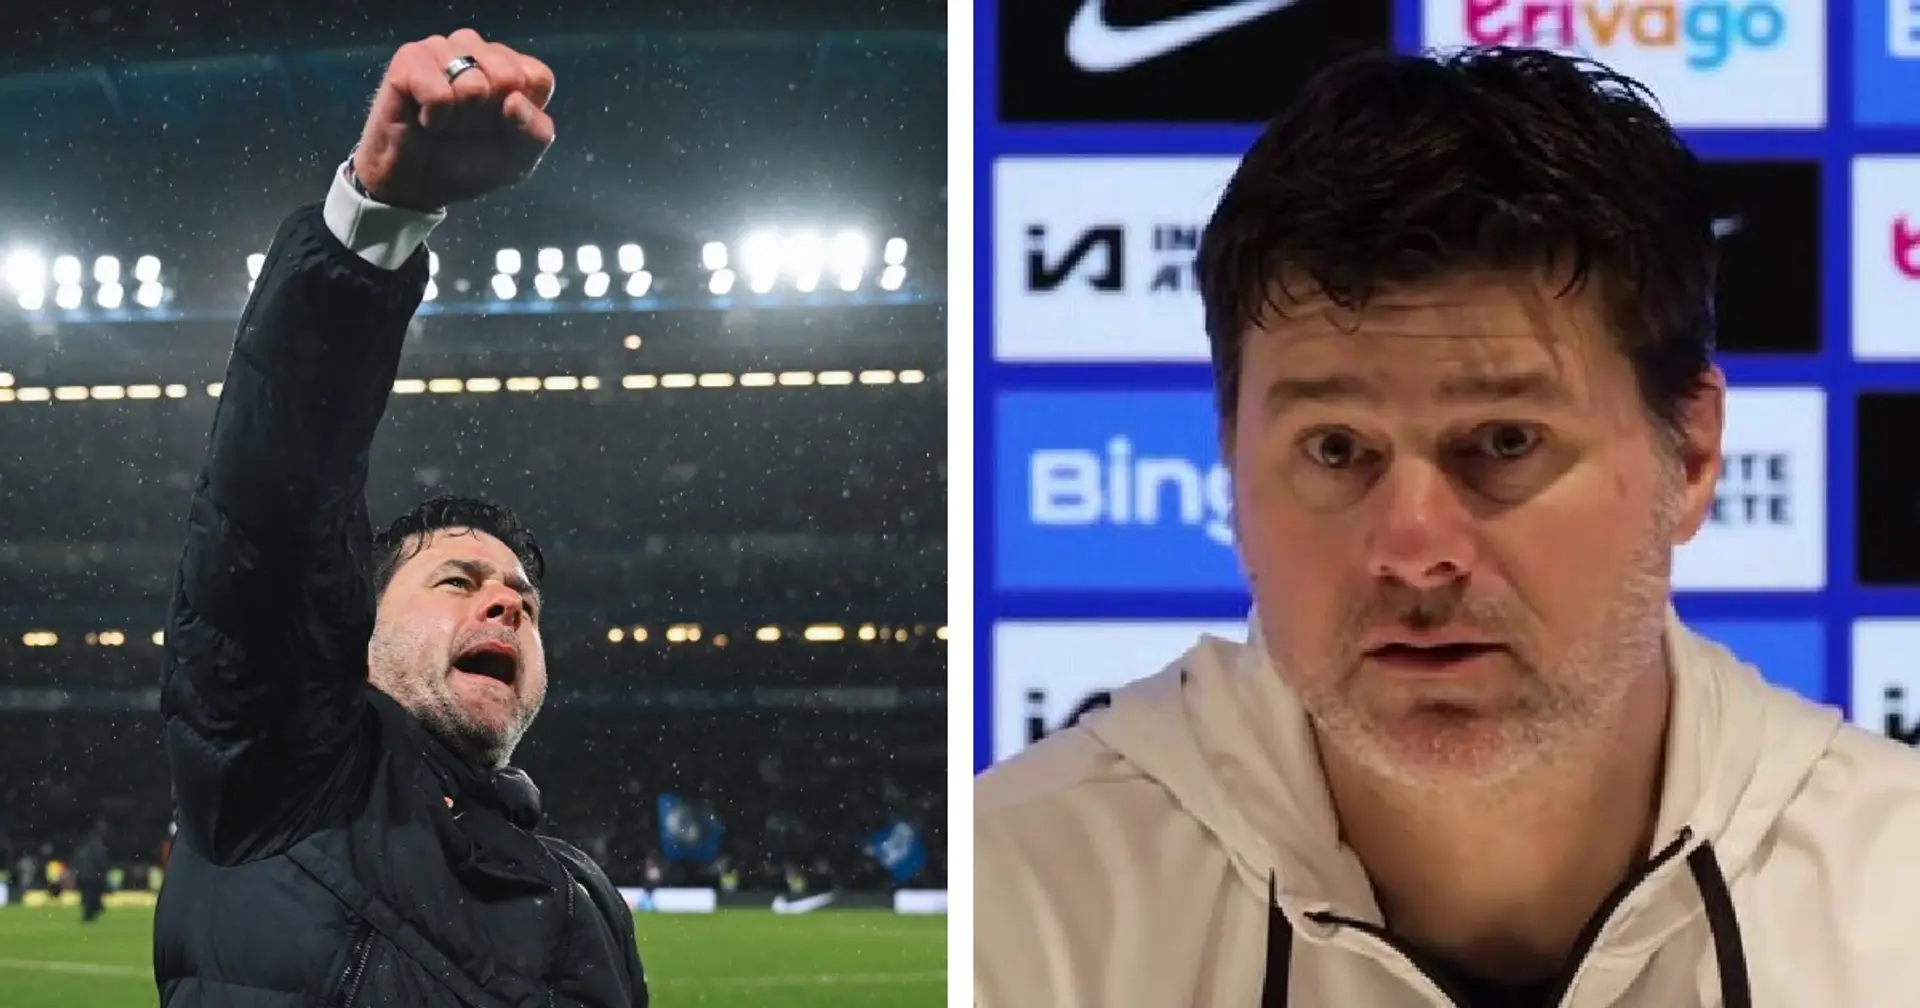 'I'm not a clown, I am a coach': Pochettino opens up on showing passion in Man United win